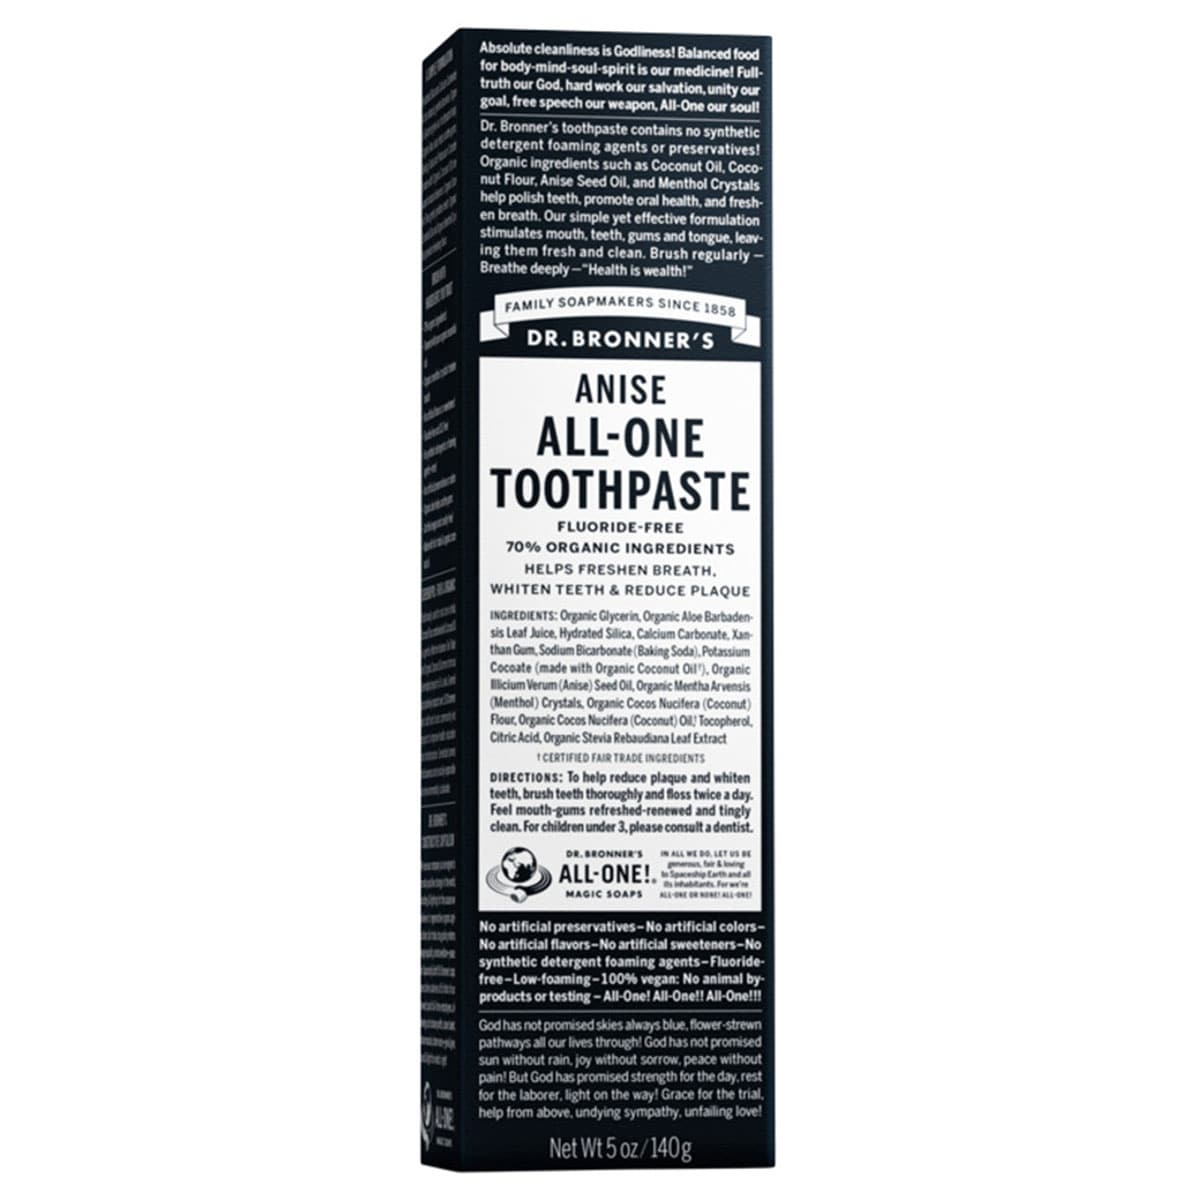 Dr Bronner's Anise All-One Toothpaste 140g